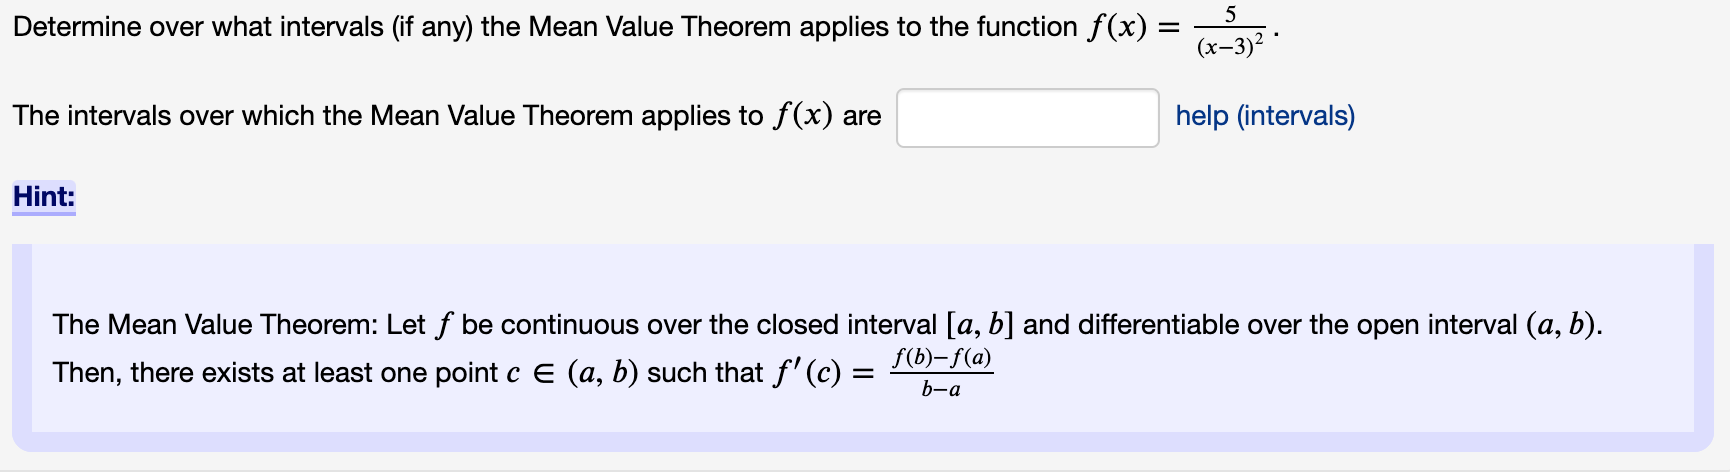 Determine over what intervals (if any) the Mean Value Theorem applies to the function f(x) =
(х-3)?
The intervals over which the Mean Value Theorem applies to f(x) are
help (intervals)
Hint:
The Mean Value Theorem: Let f be continuous over the closed interval [a, b] and differentiable over the open interval (a, b).
Then, there exists at least one point c E (a, b) such that f'(c) =
f(b)–f(a)
b-a
